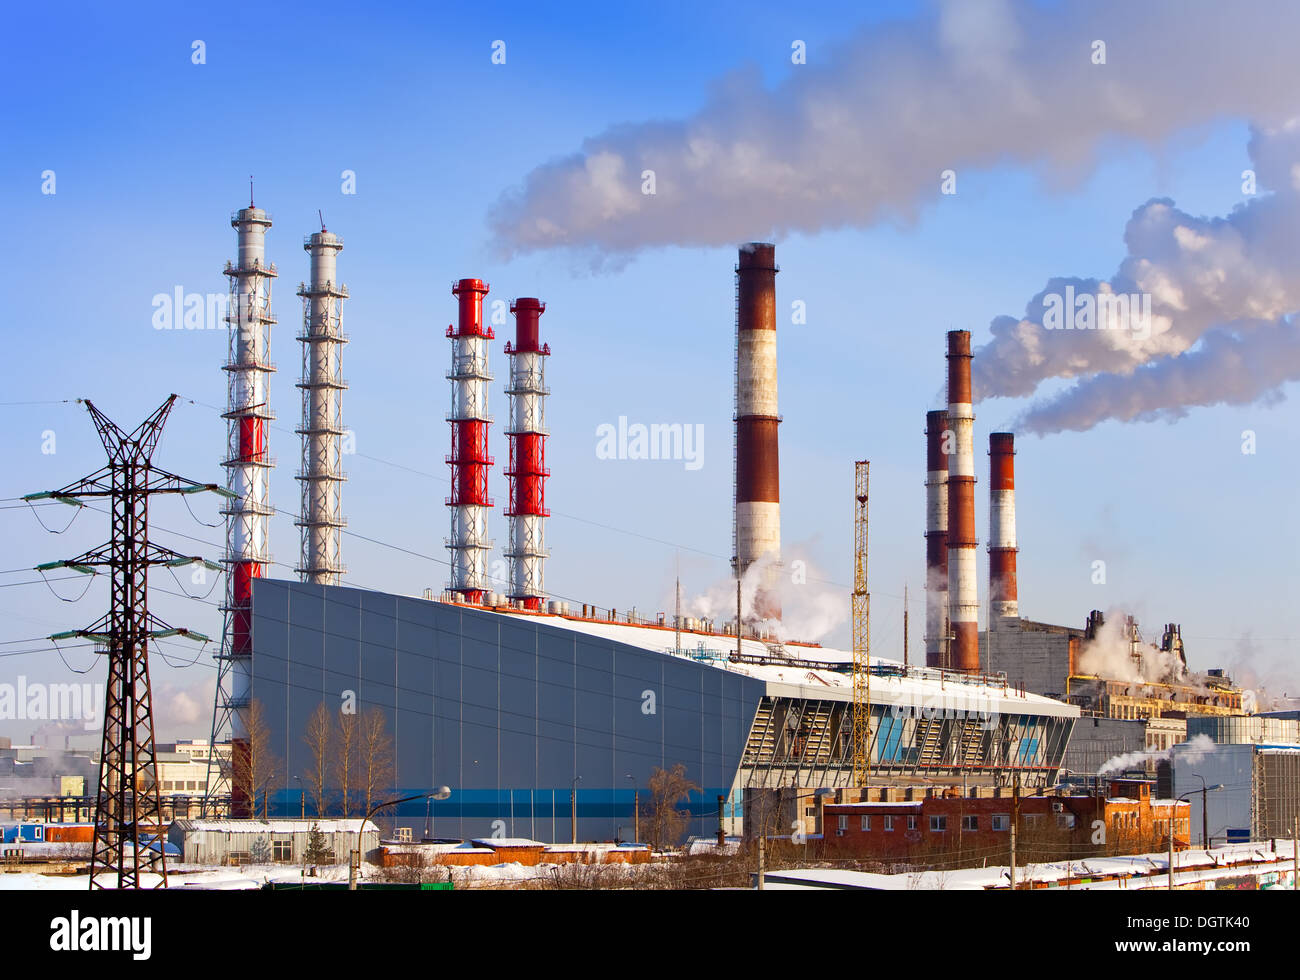 unit of combined heat and power plant Stock Photo